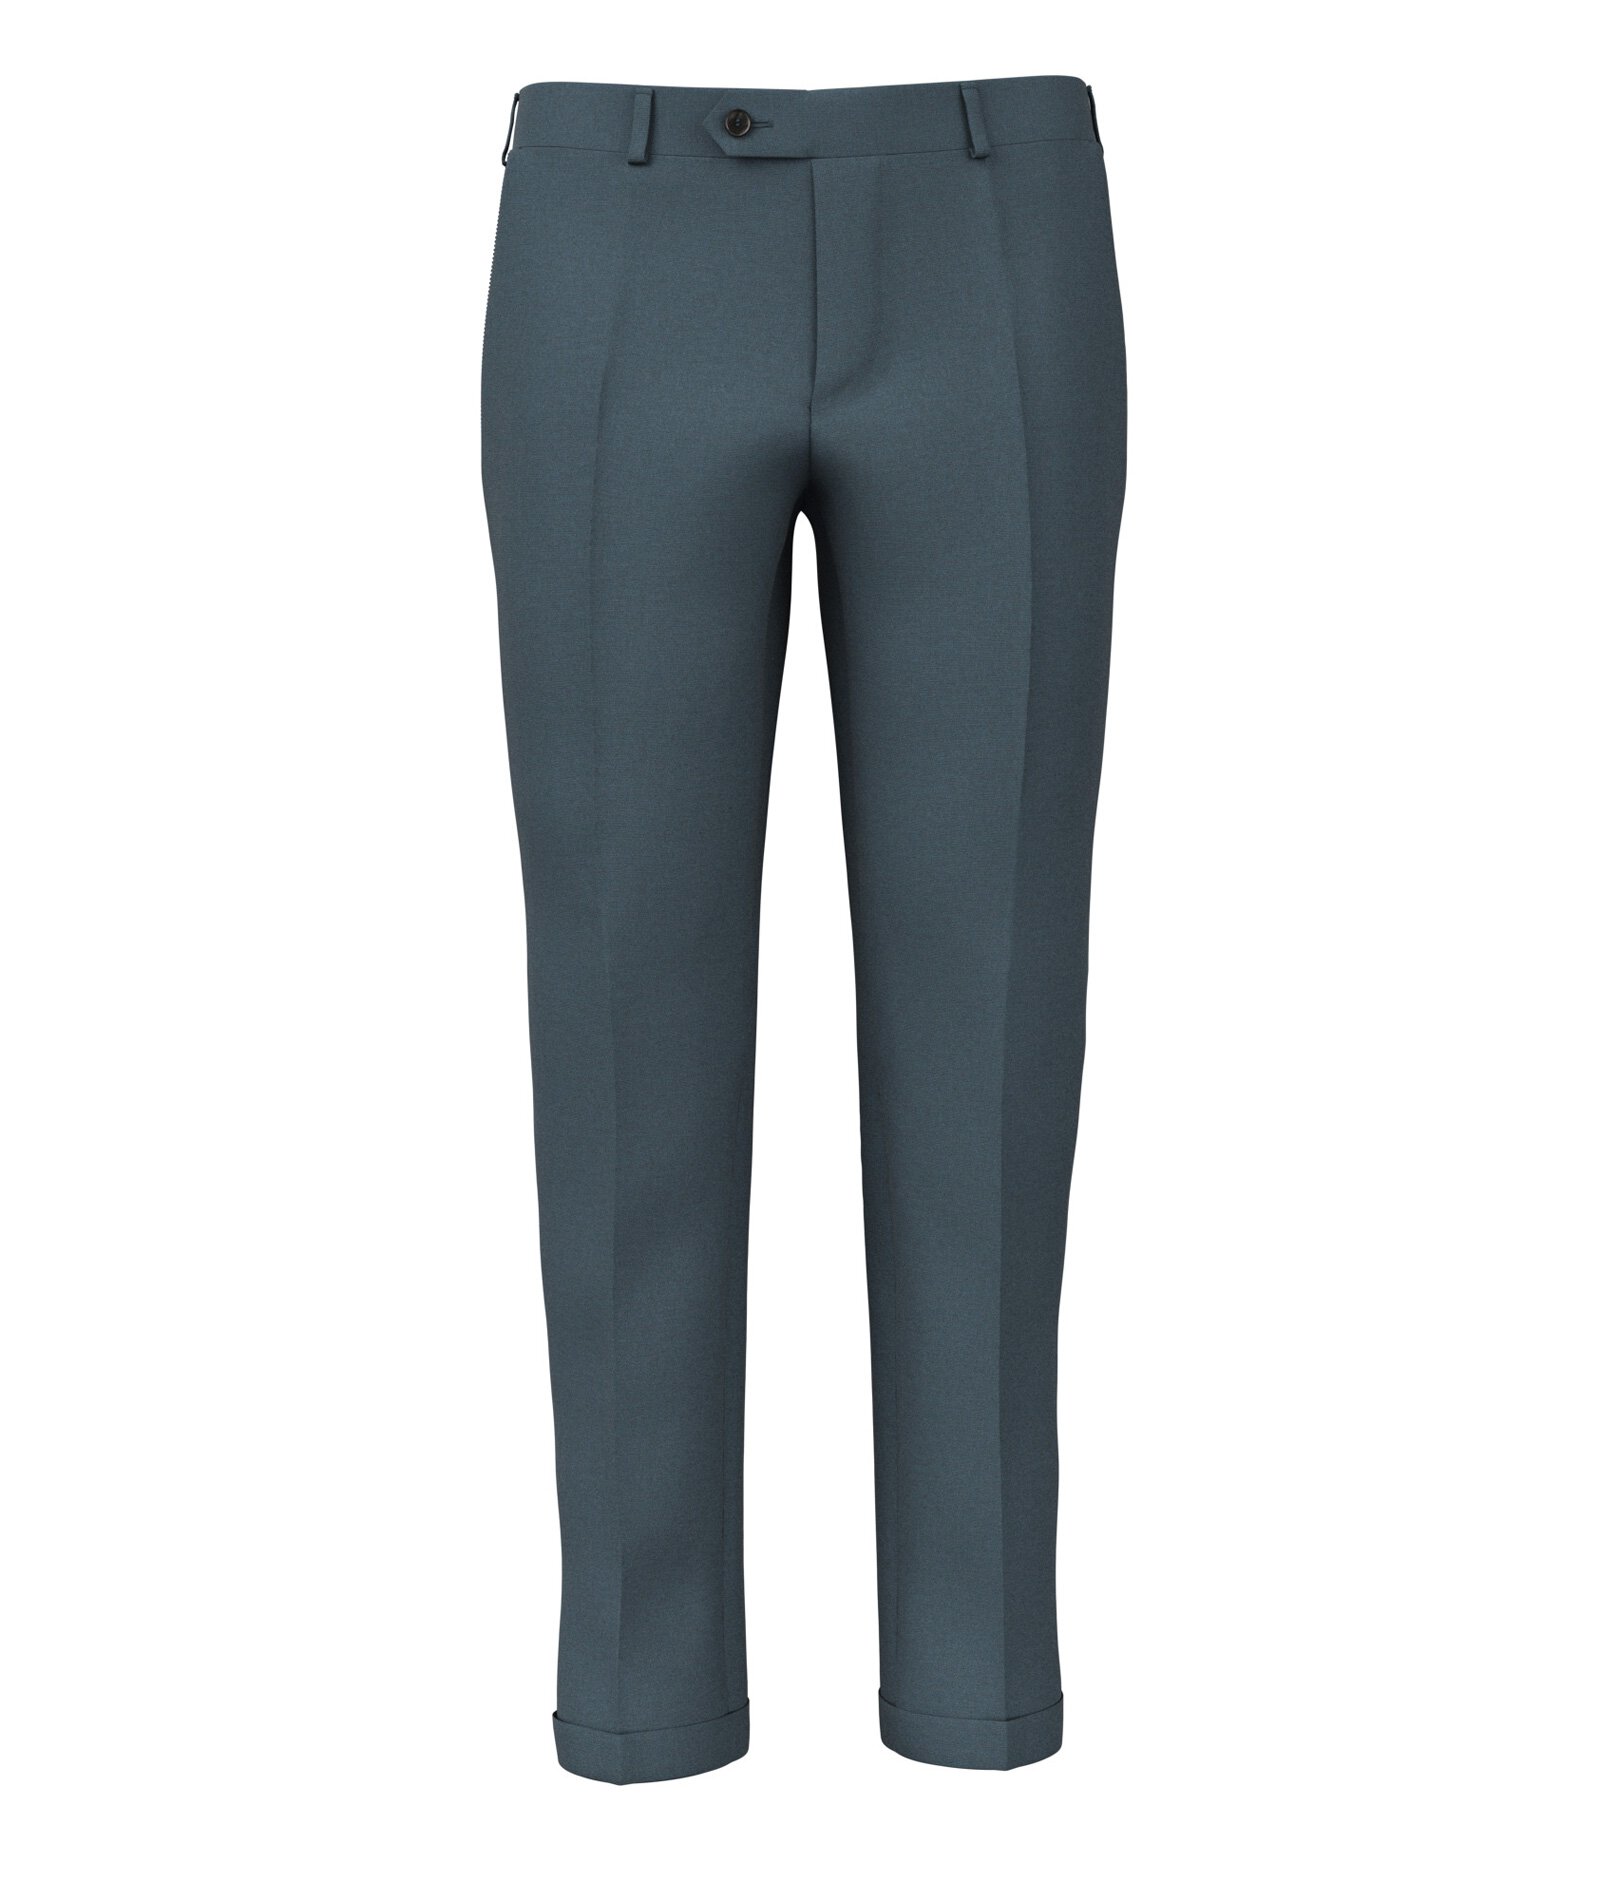 Made to Measure Trousers Online: Custom Fit Pants for Men @Tailorman